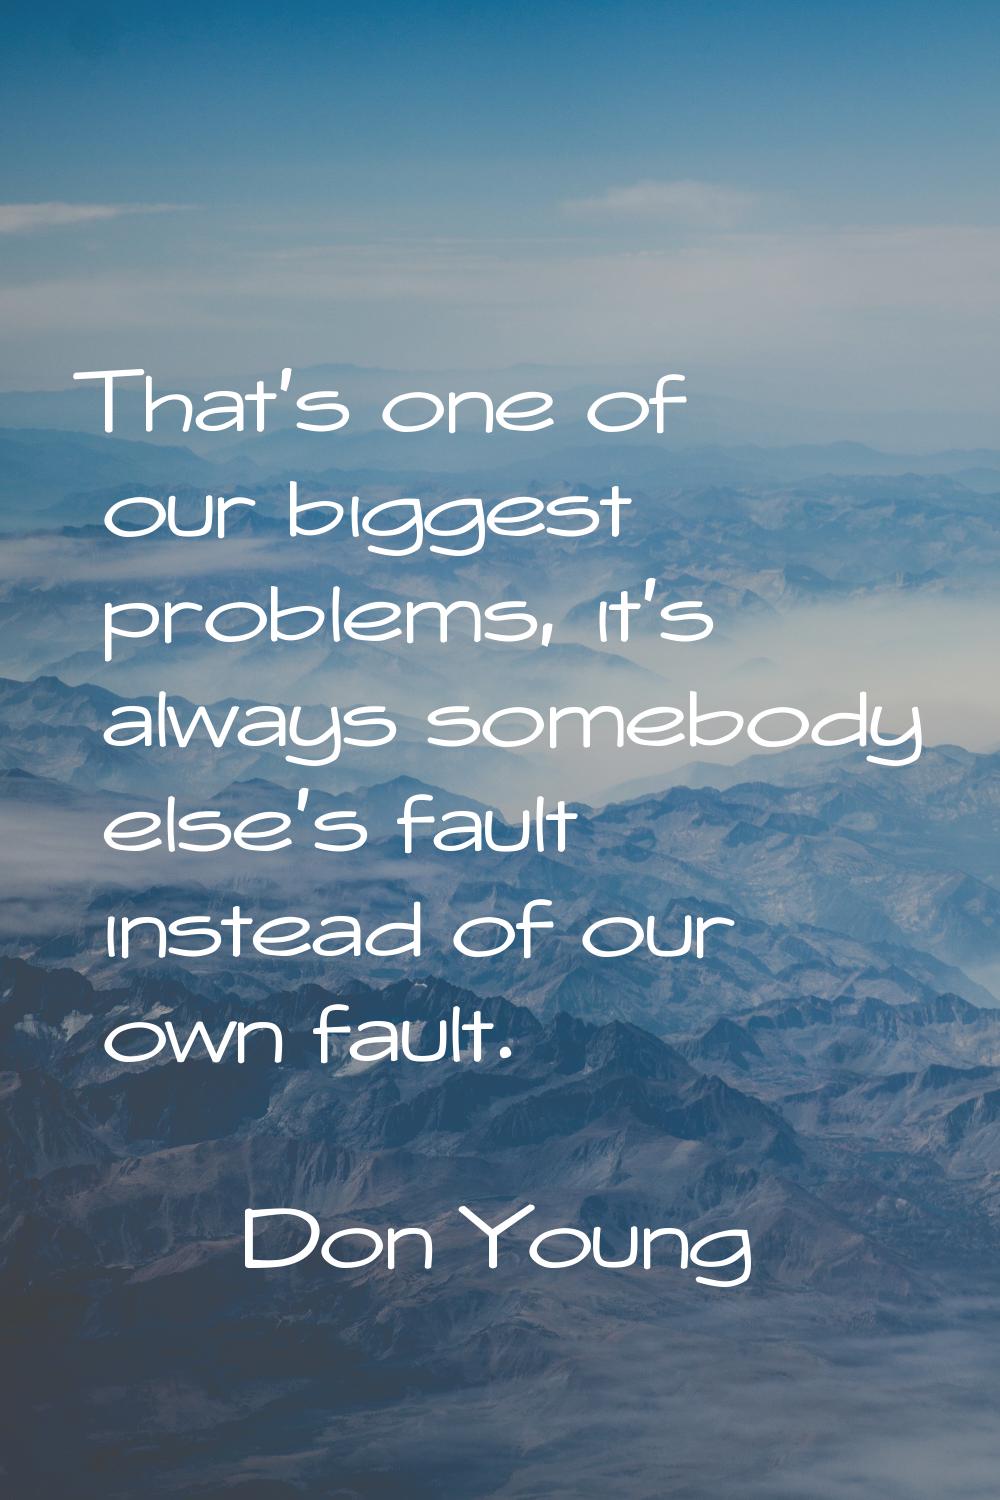 That's one of our biggest problems, it's always somebody else's fault instead of our own fault.